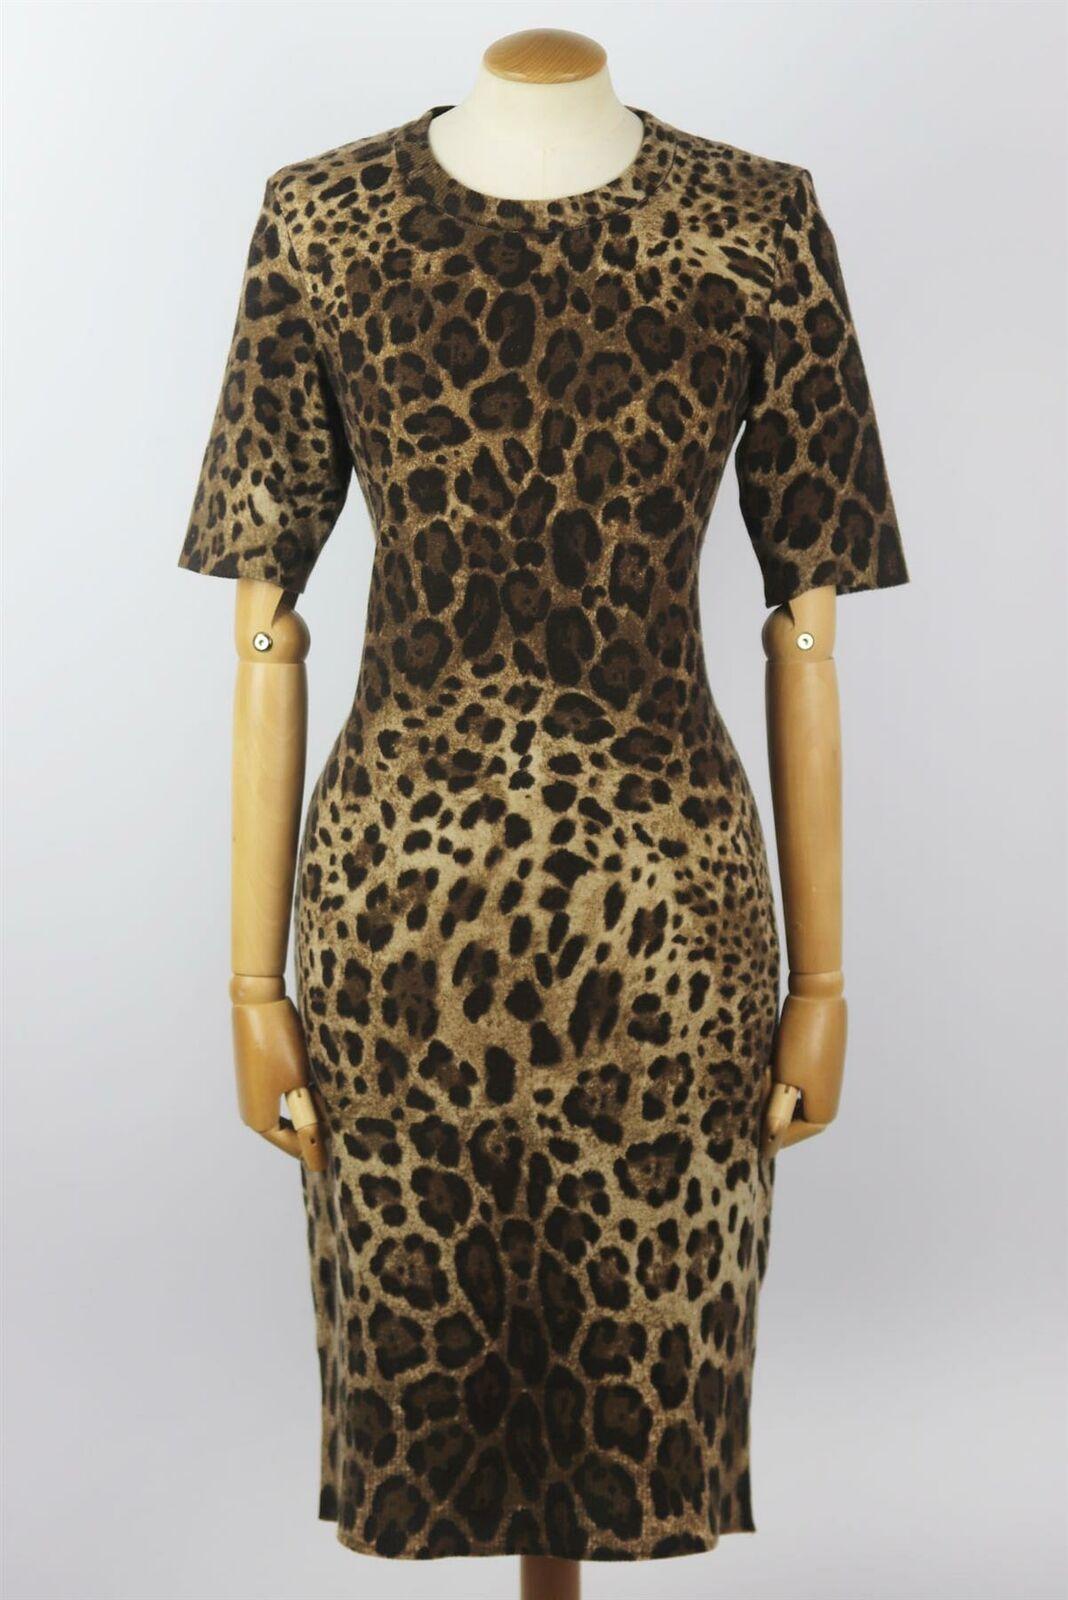 This dress by Dolce & Gabbana is a classic with leopard print cashmere-blend composition and soft smooth silhouette that holds the shape beautifully and nips in perfectly at the waist for an elongated silhouette.
Brown cashmere-blend. 
Slips on.